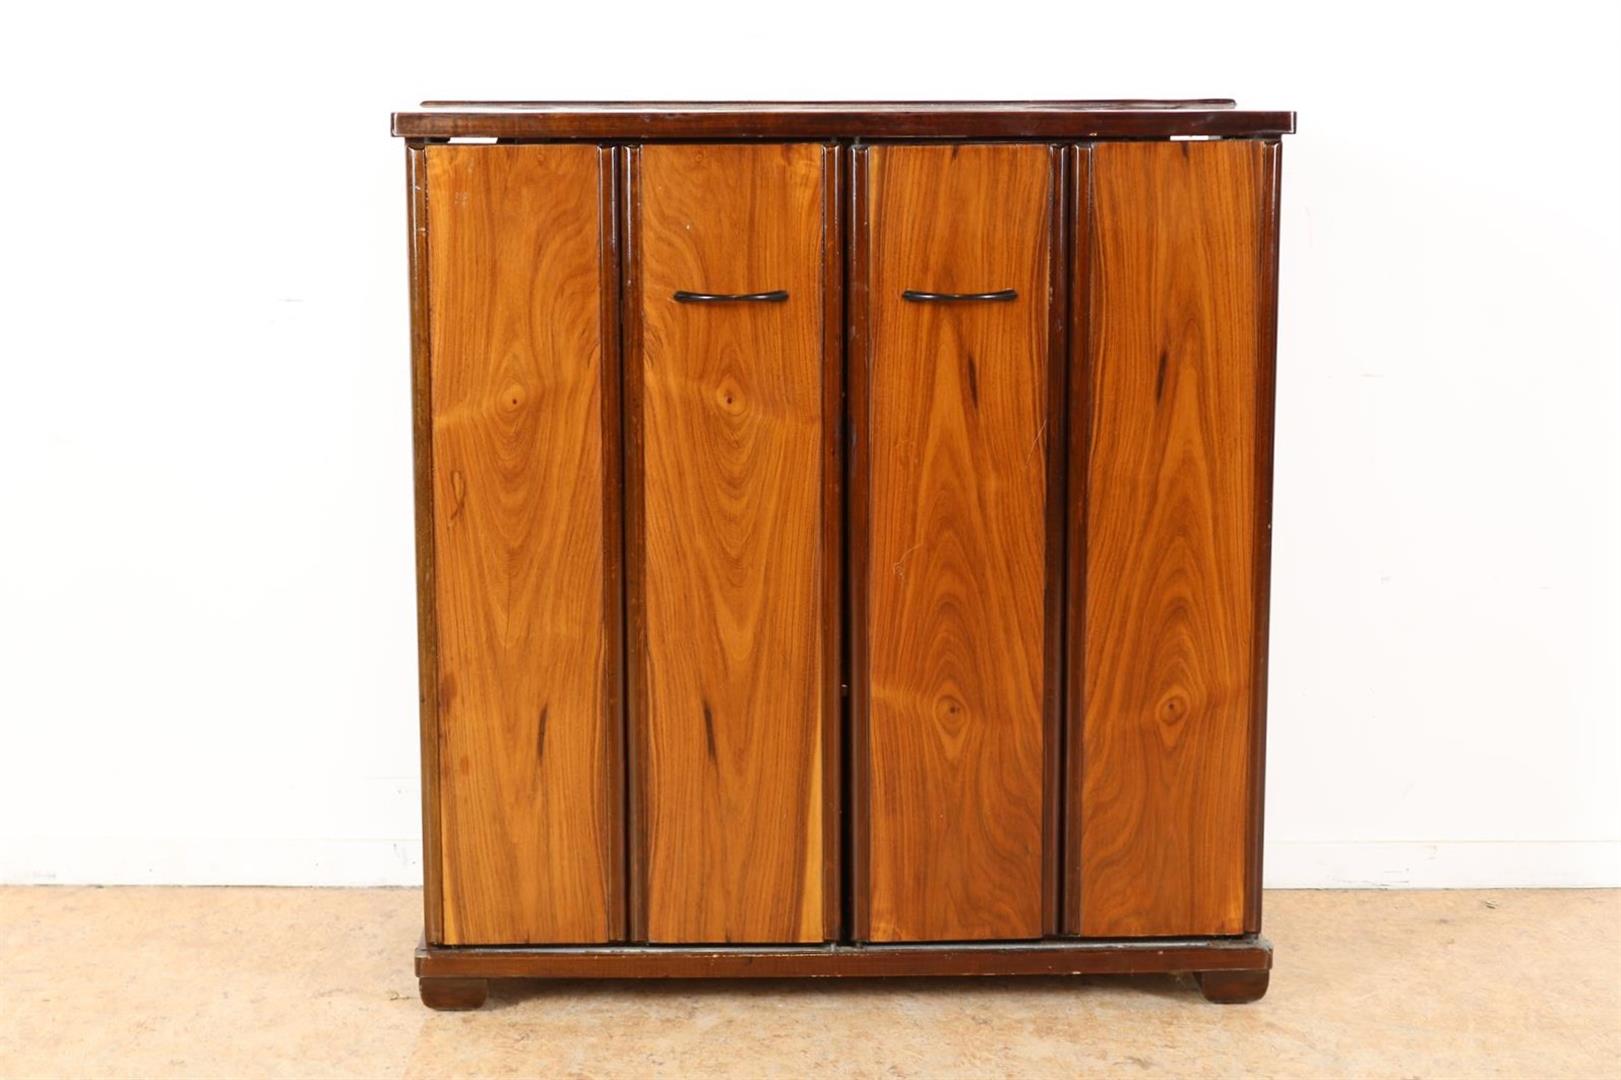 Mahogany veneered shoe cabinet with 2 shutter doors and internal drawer and sloping shelves, 83 x 90